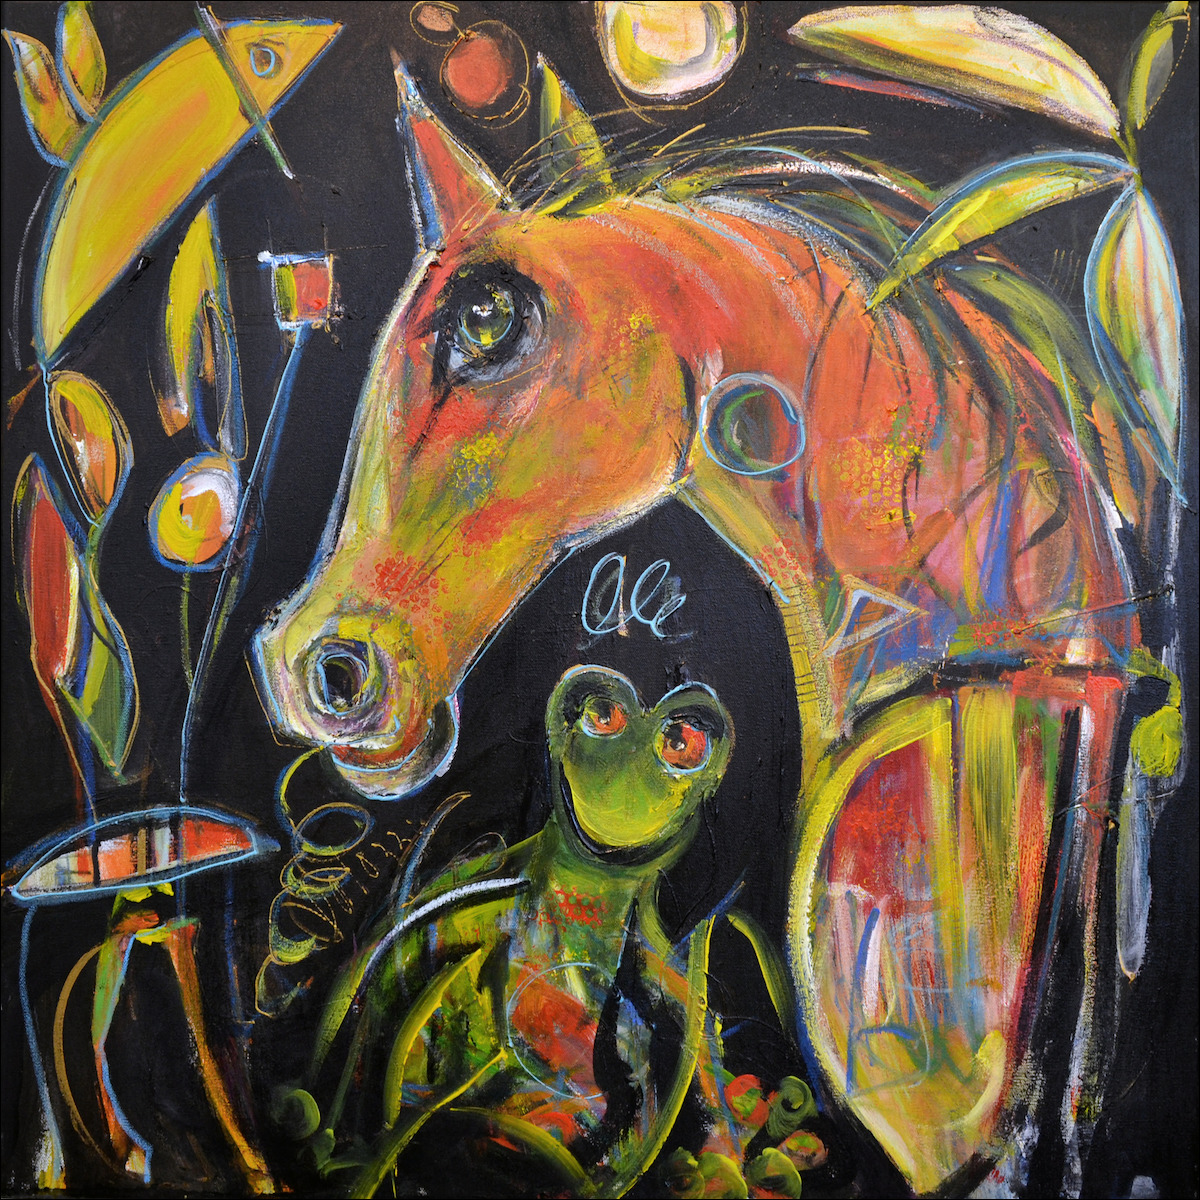 Animal Painting "Animal Magnetism Horse" by Lucette Dalozzo